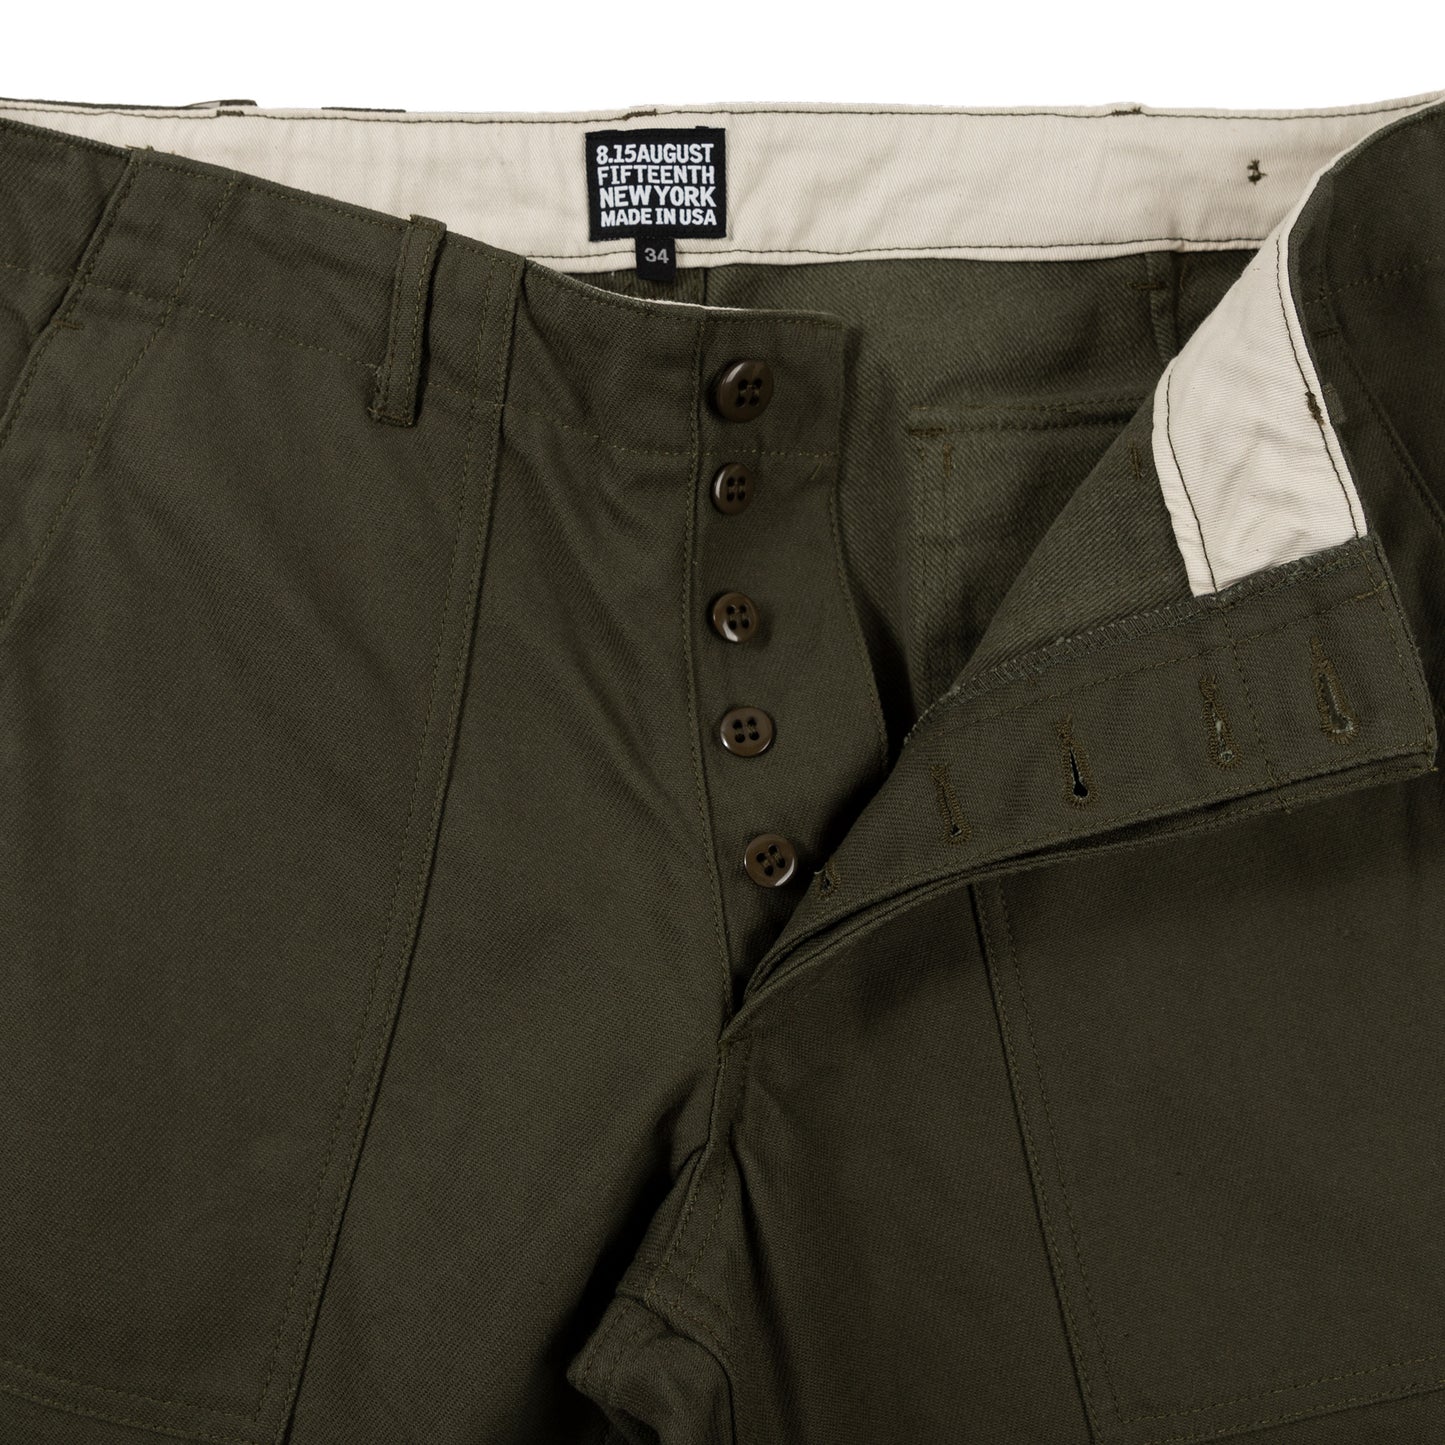 August Fifteenth Fatigue Trousers Back Twill Olive Detail